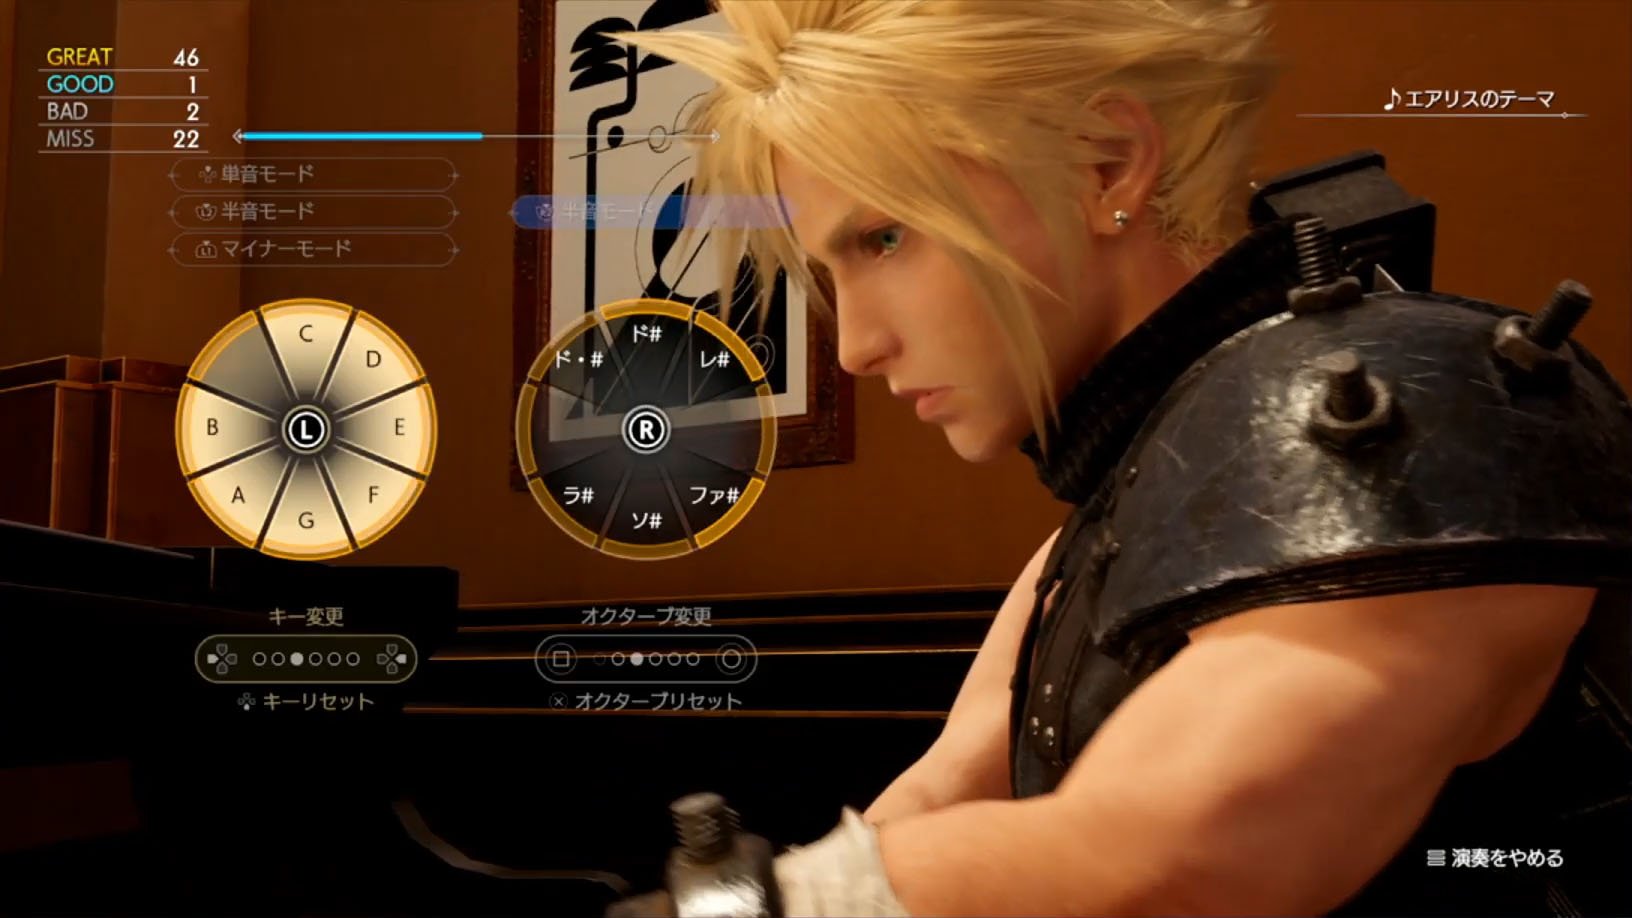 Final Fantasy 7 Remake Director Says Square Enix Will Share FF7 News Next  Month - Game Informer